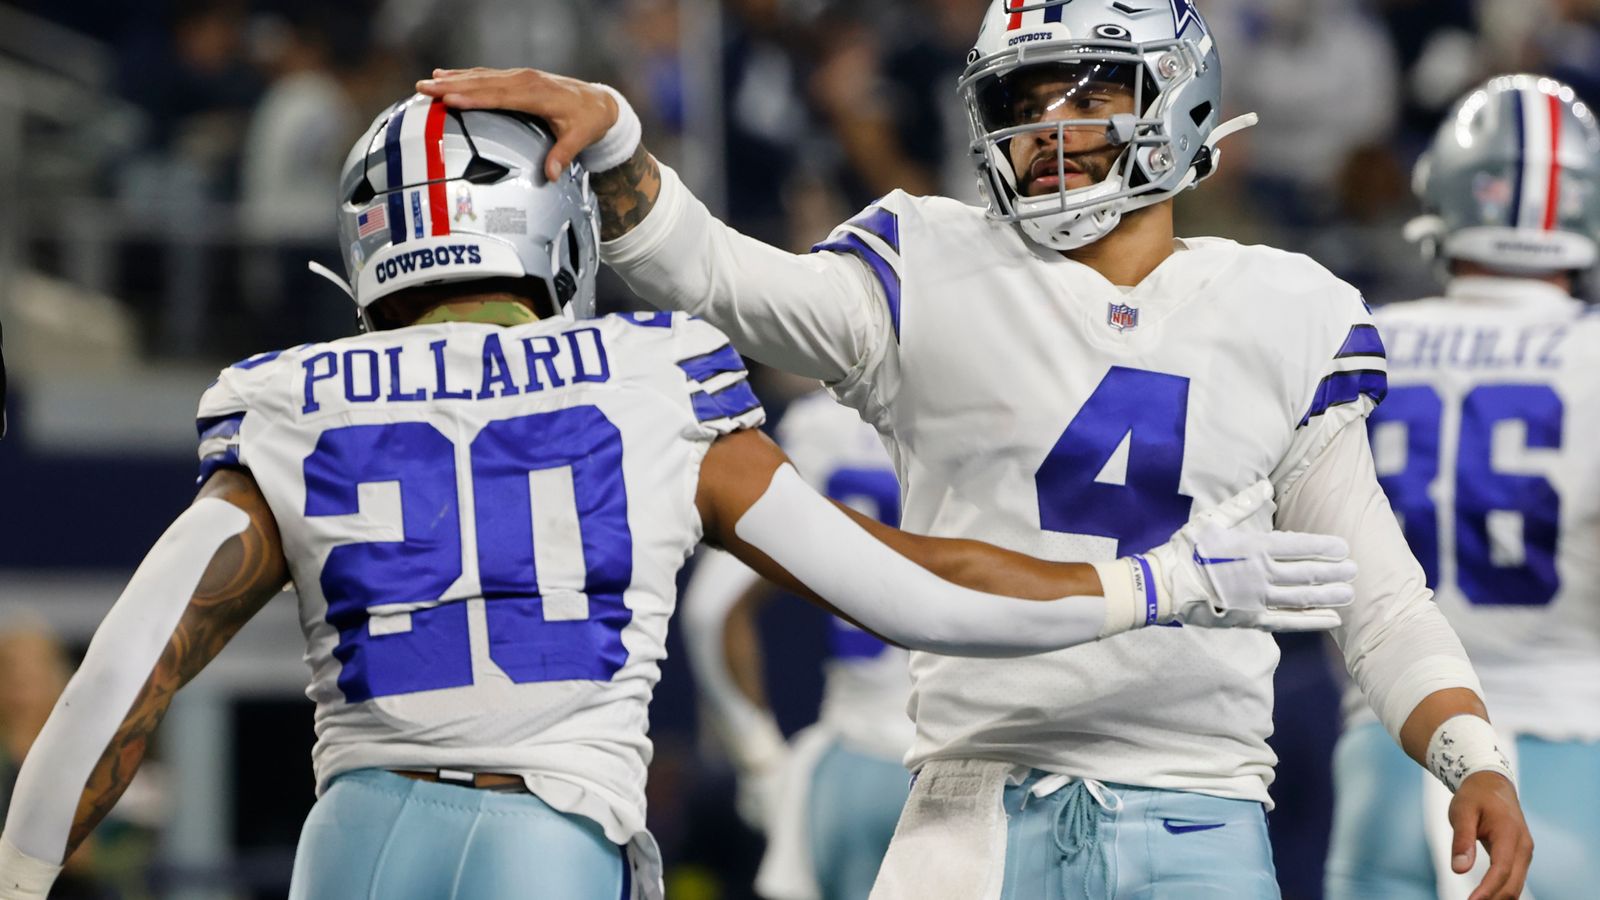 Dallas Cowboys score 33 fourth-quarter points as they rout Indianapolis Colts 54-19 at home